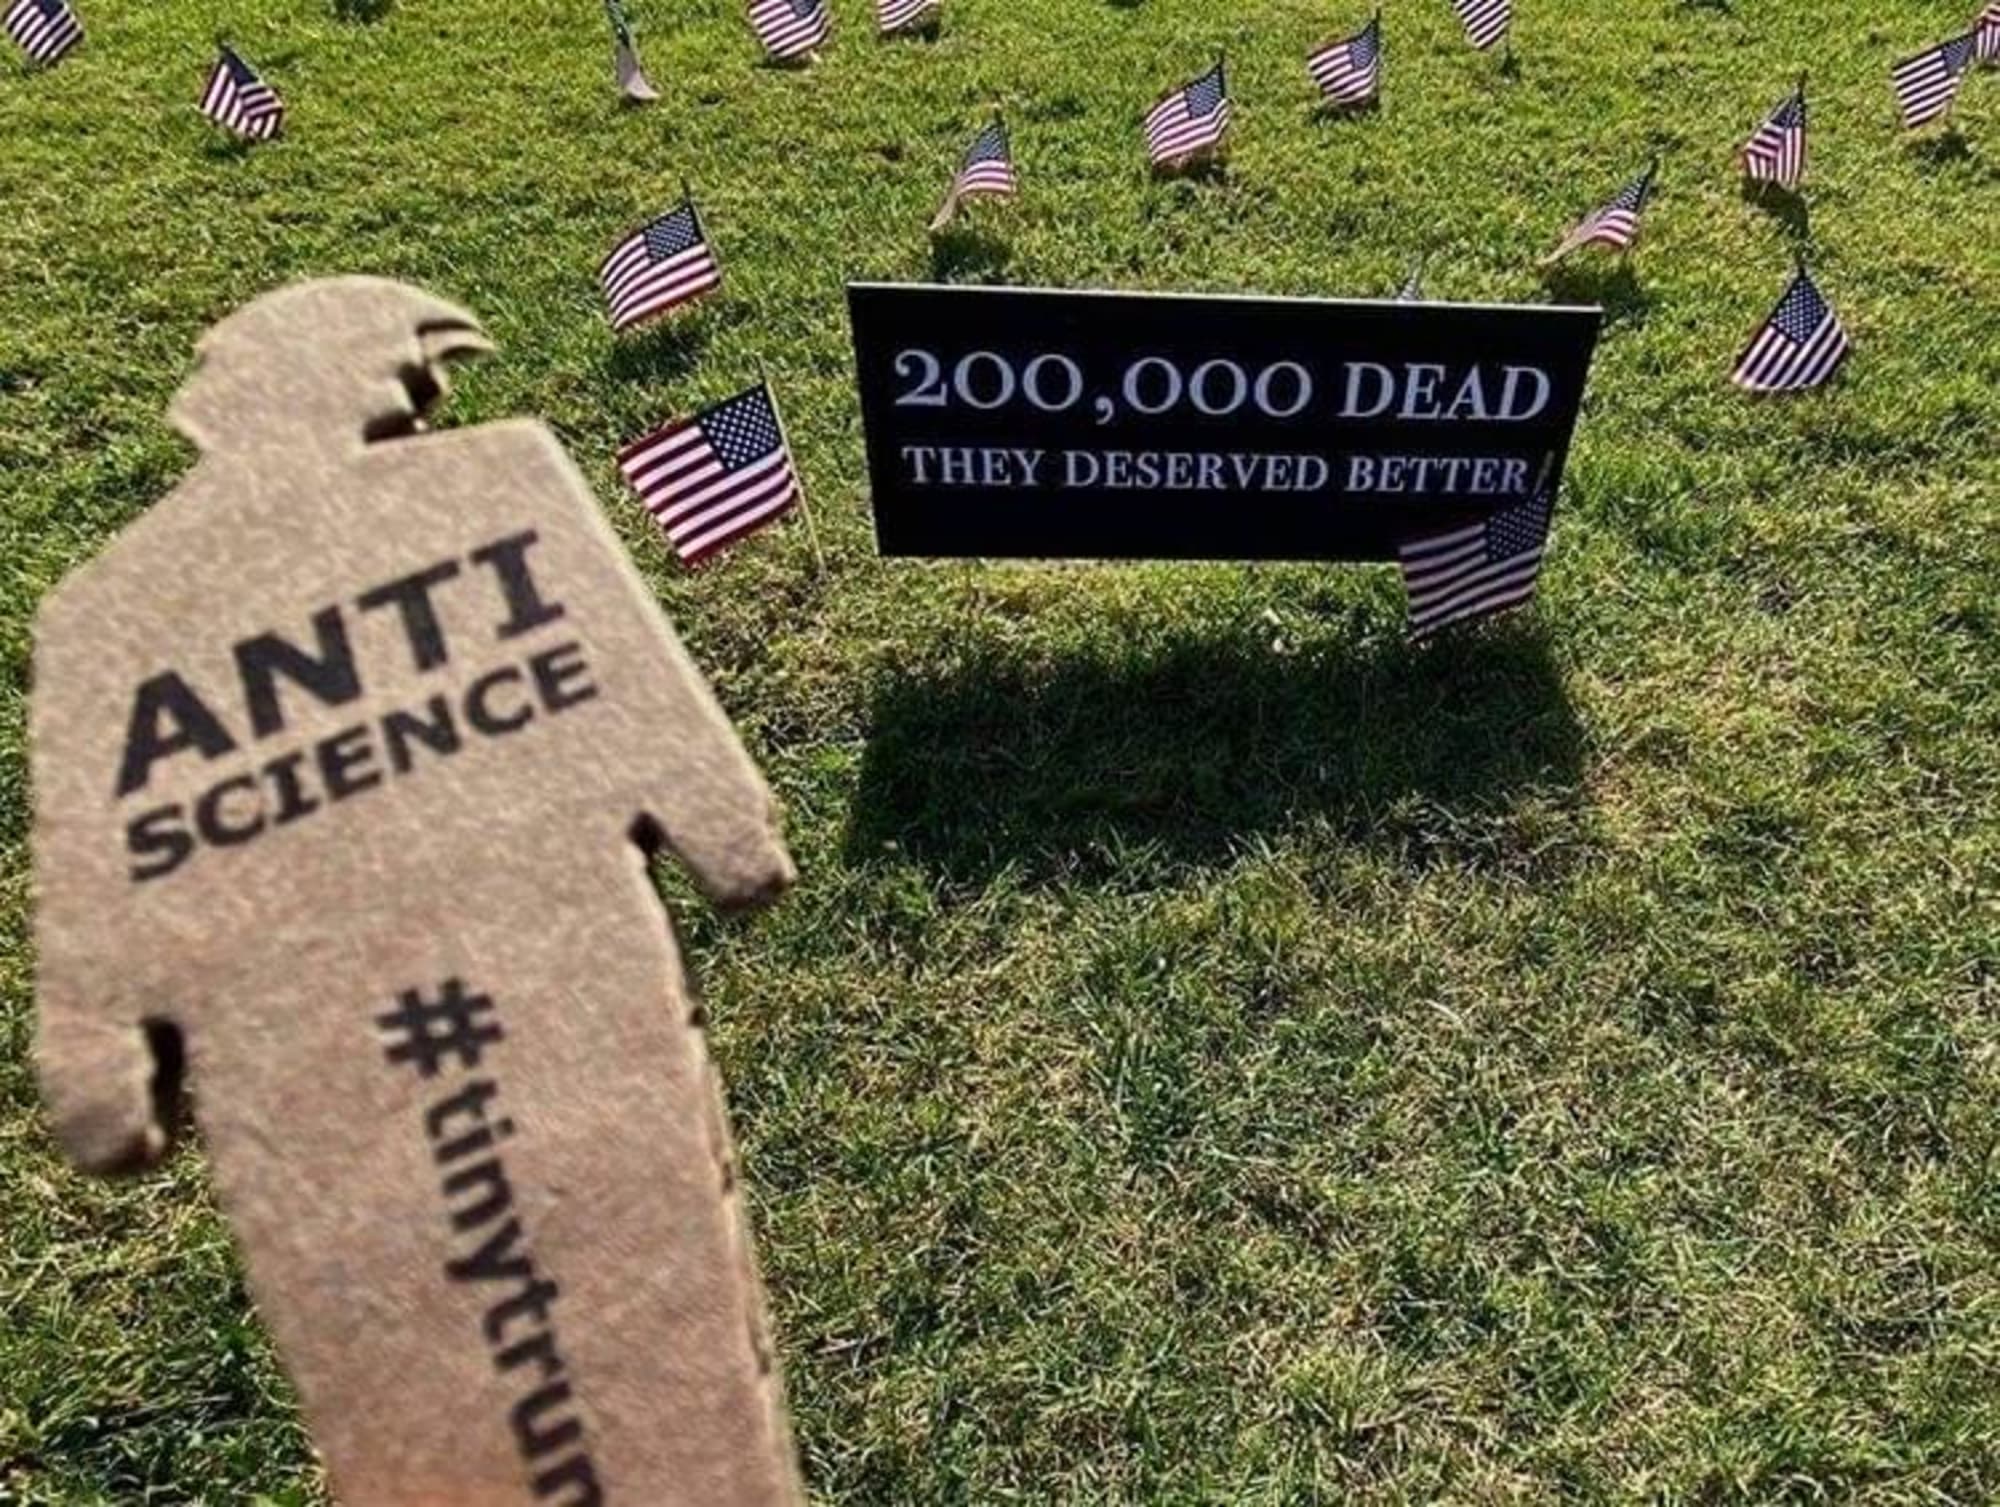 a photograph of a tiny trump with the slogan 'Anti-Science' held in front of a sign that reads '200,000' dead, they deserved better